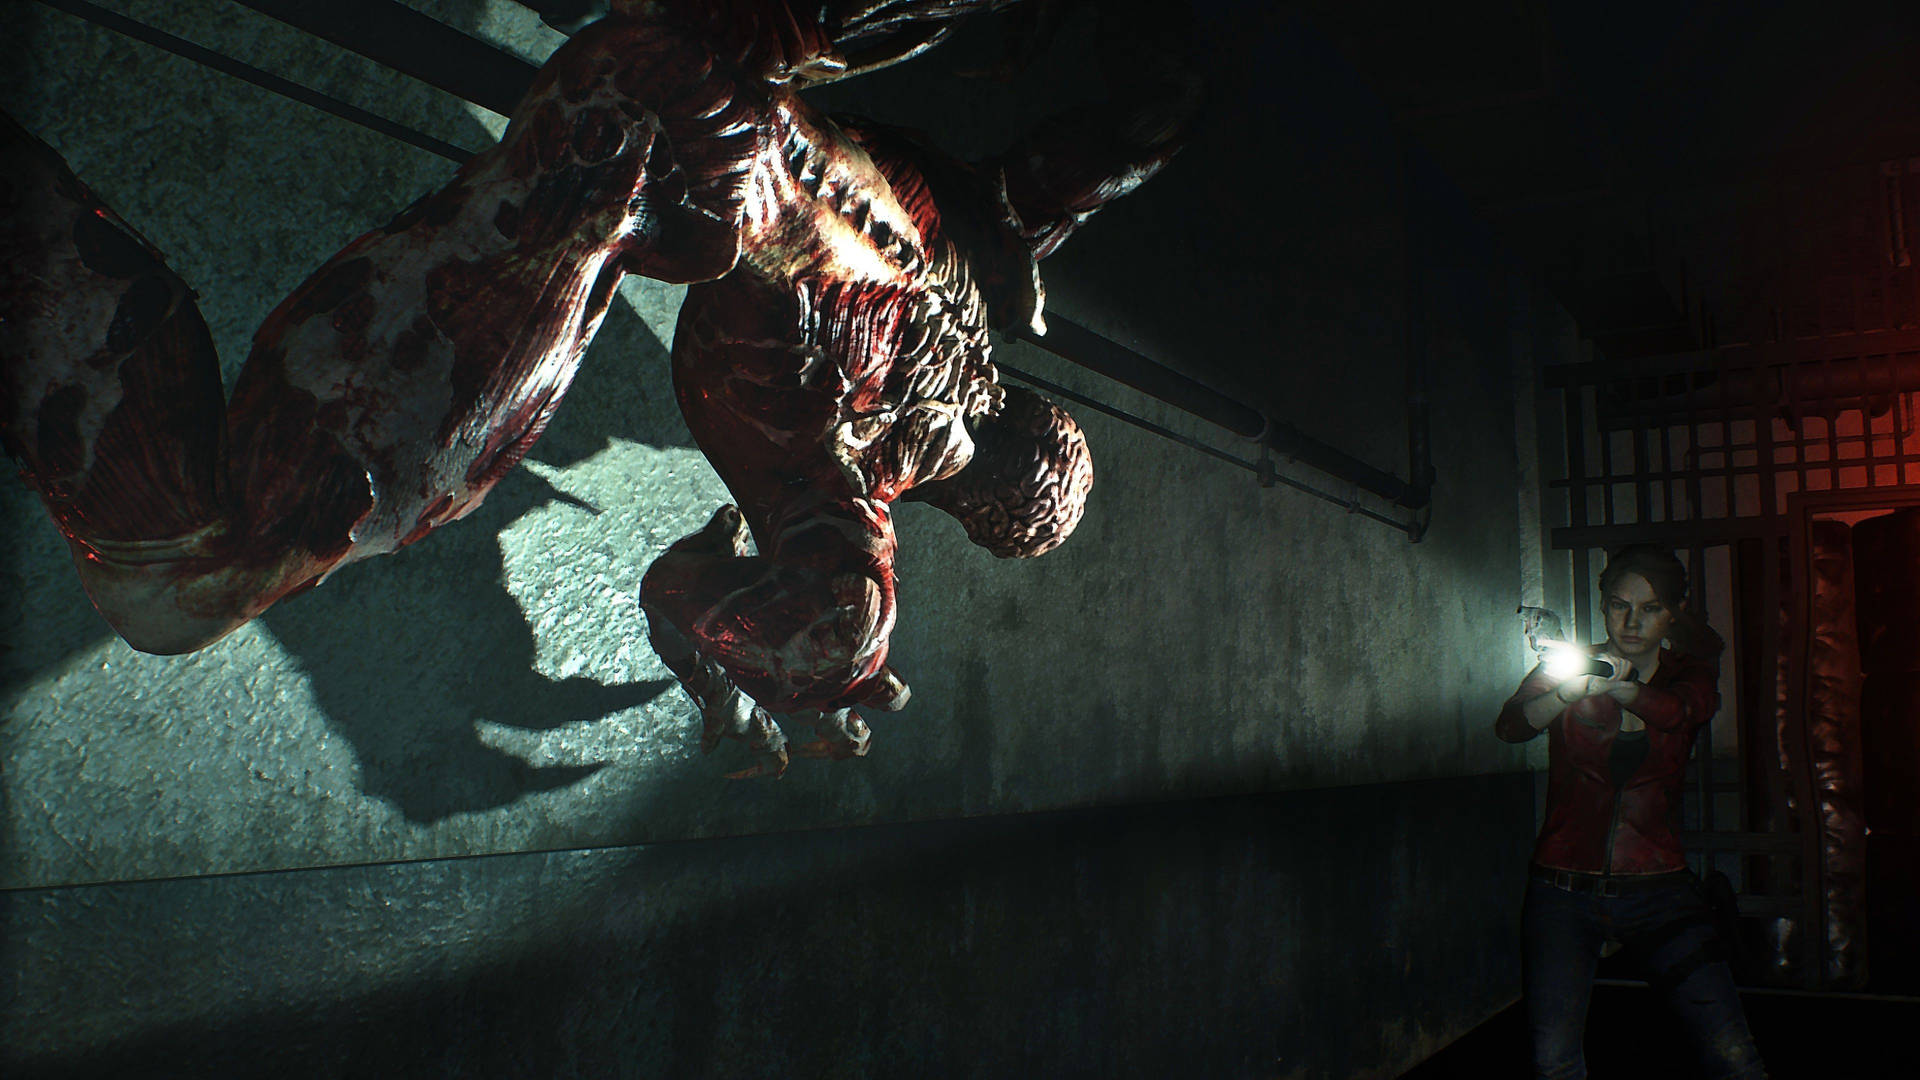 "Keep your distance from the menacing Licker in Resident Evil 2 Remake". Wallpaper